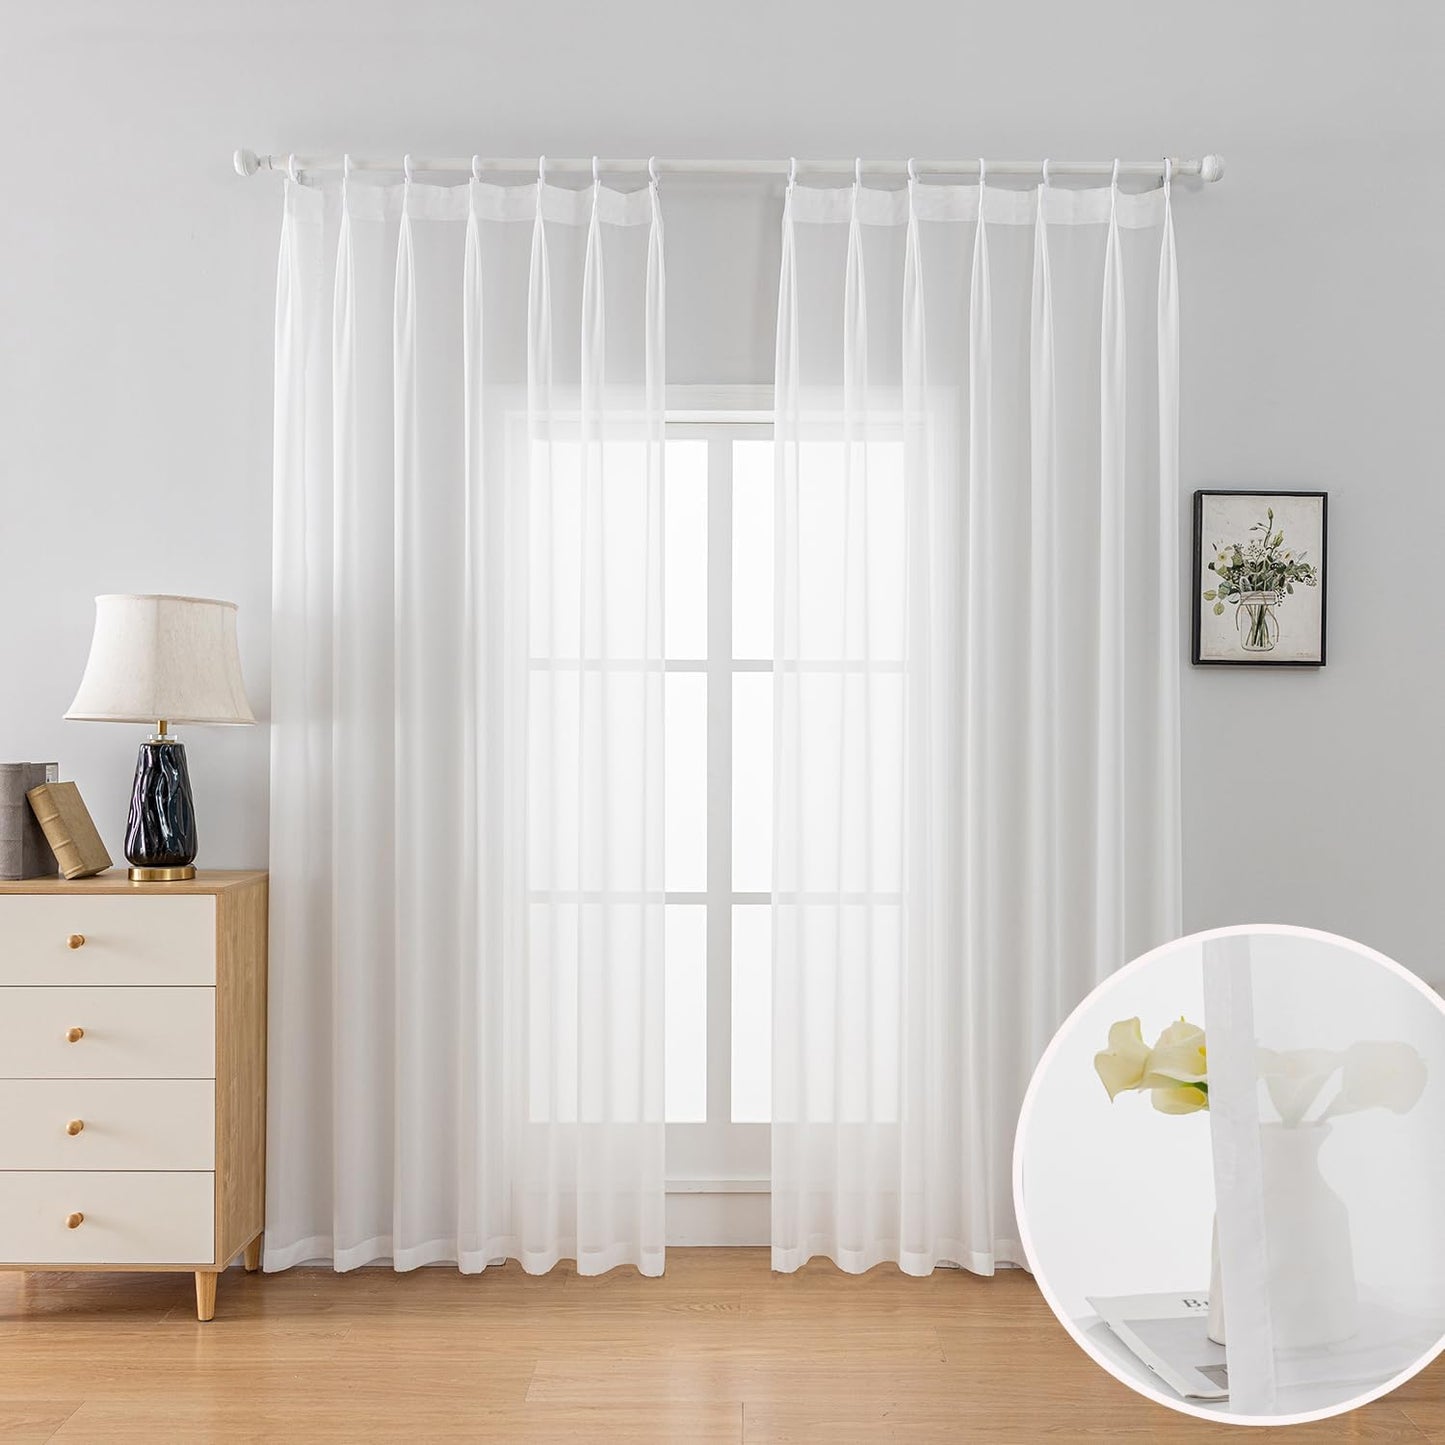 LUGOTAL Pinch Pleated Drapes 108 Inches Long 1 Panel off White Chiffon Sheer Curtains for Living Room and Bedroom Semi-Sheer Light Filtering Curtains & Drapes for Sliding Glass Door, W52 X L108  LUGOTAL White (W40" X L96")*1 Panel 